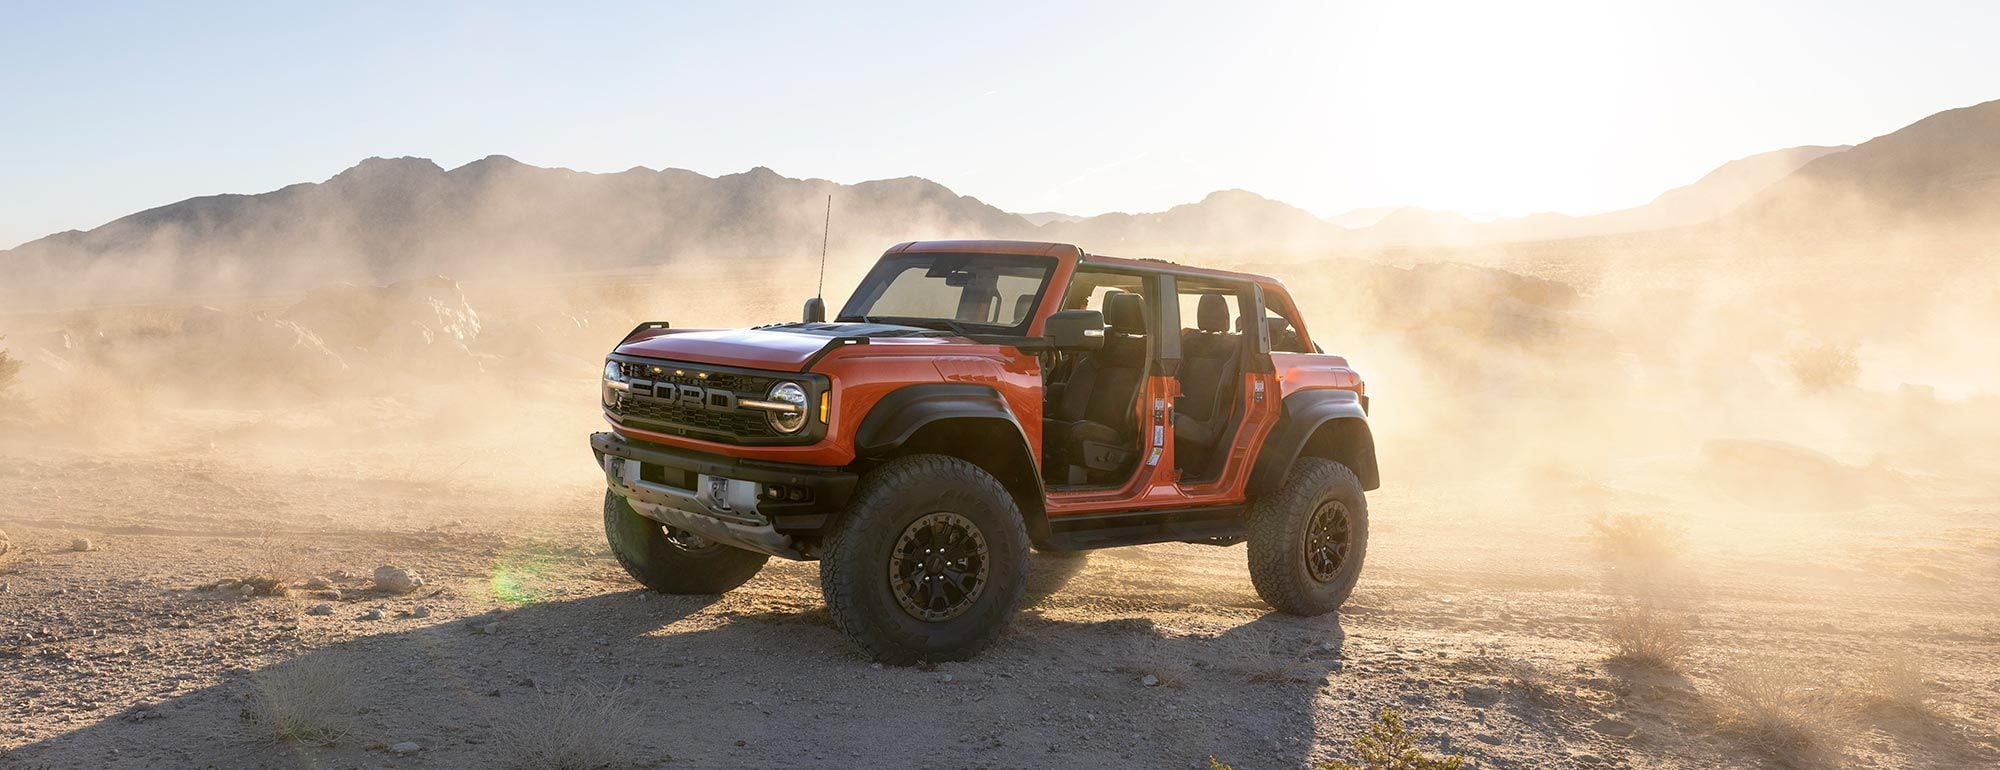 The Bronco Raptor lands with 400 hp and Fox Live Valve suspension.